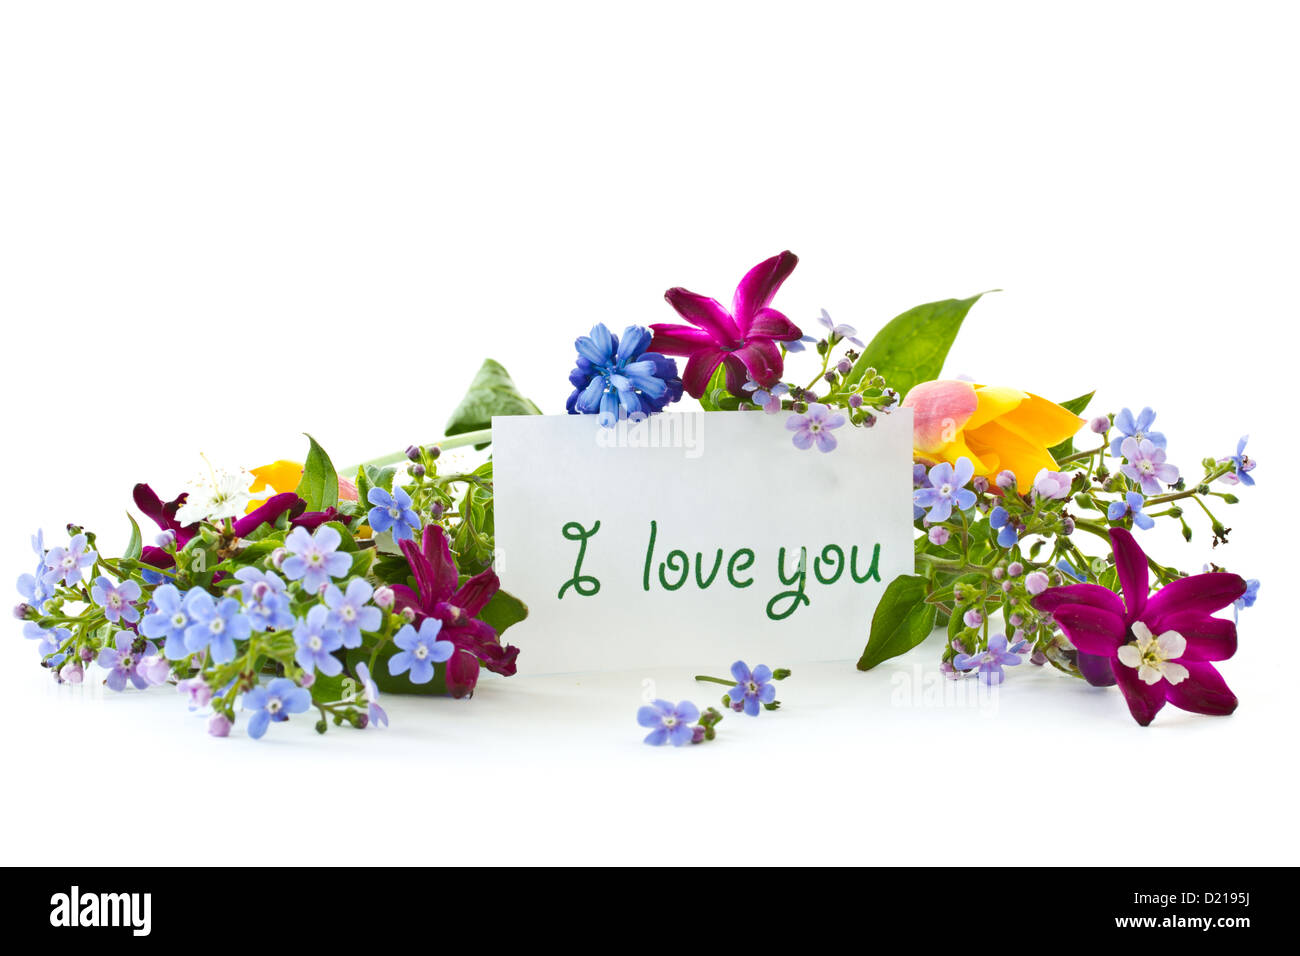 bouquet of spring flowers on a white background Stock Photo